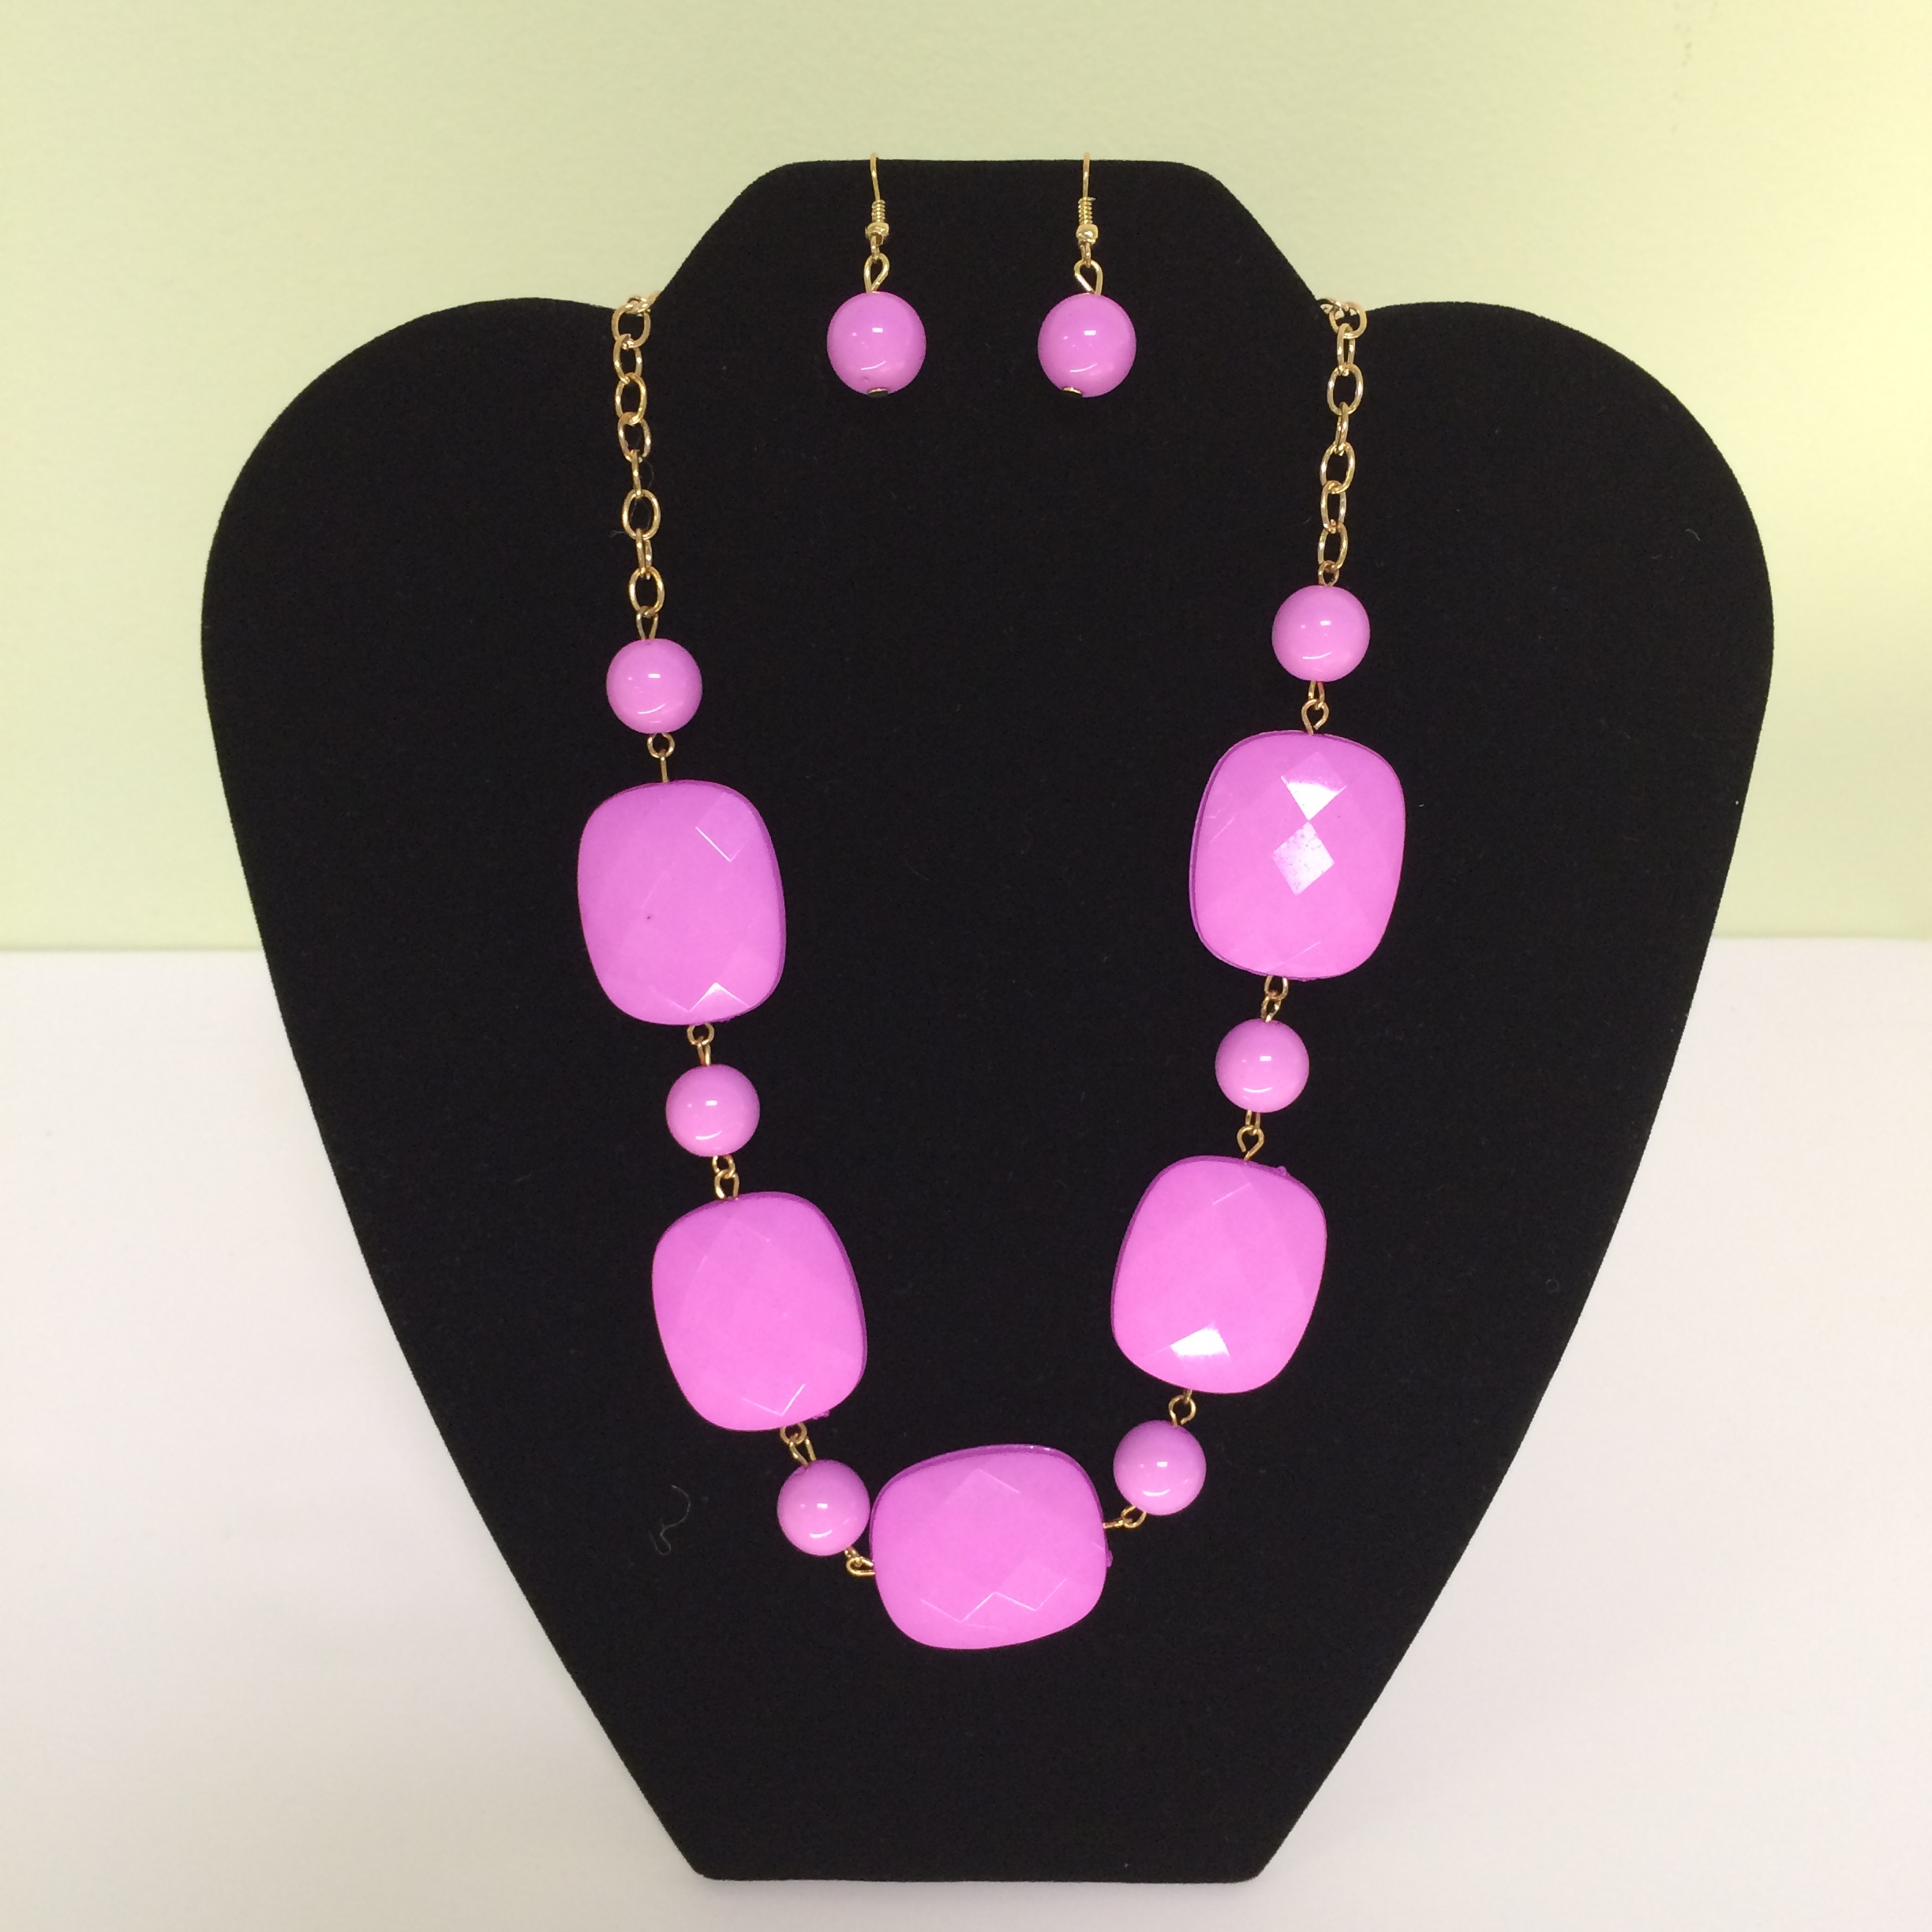 Fashion Necklace & Earring Pink & Square Beads Set 128on Gold Colored Chain Necklace & Earrings Set